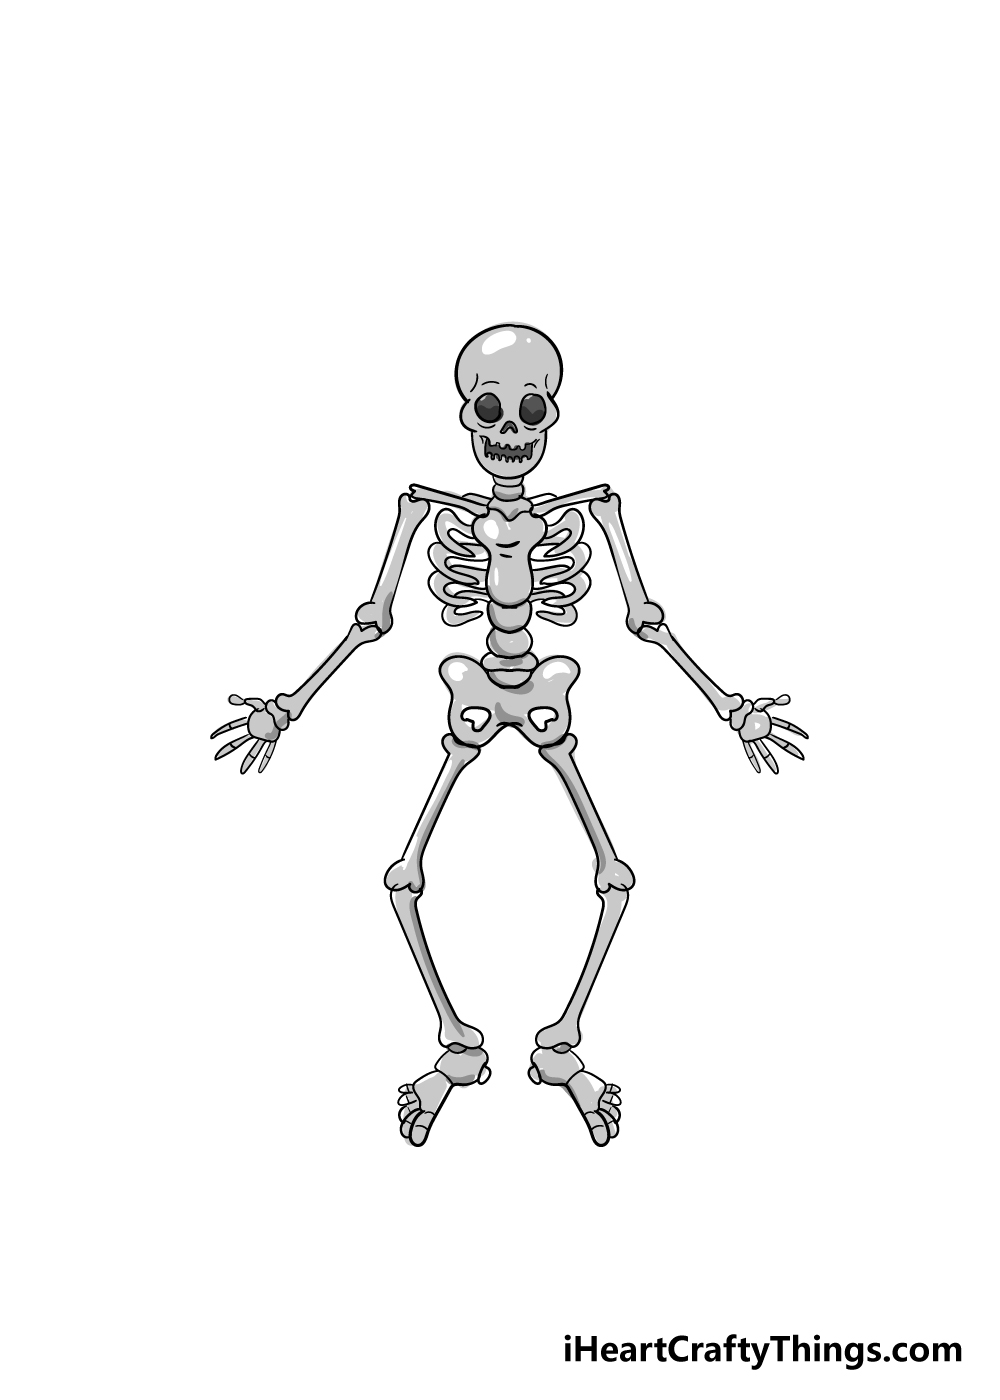 How To Draw A Skeleton Printable Step By Step Drawing - vrogue.co